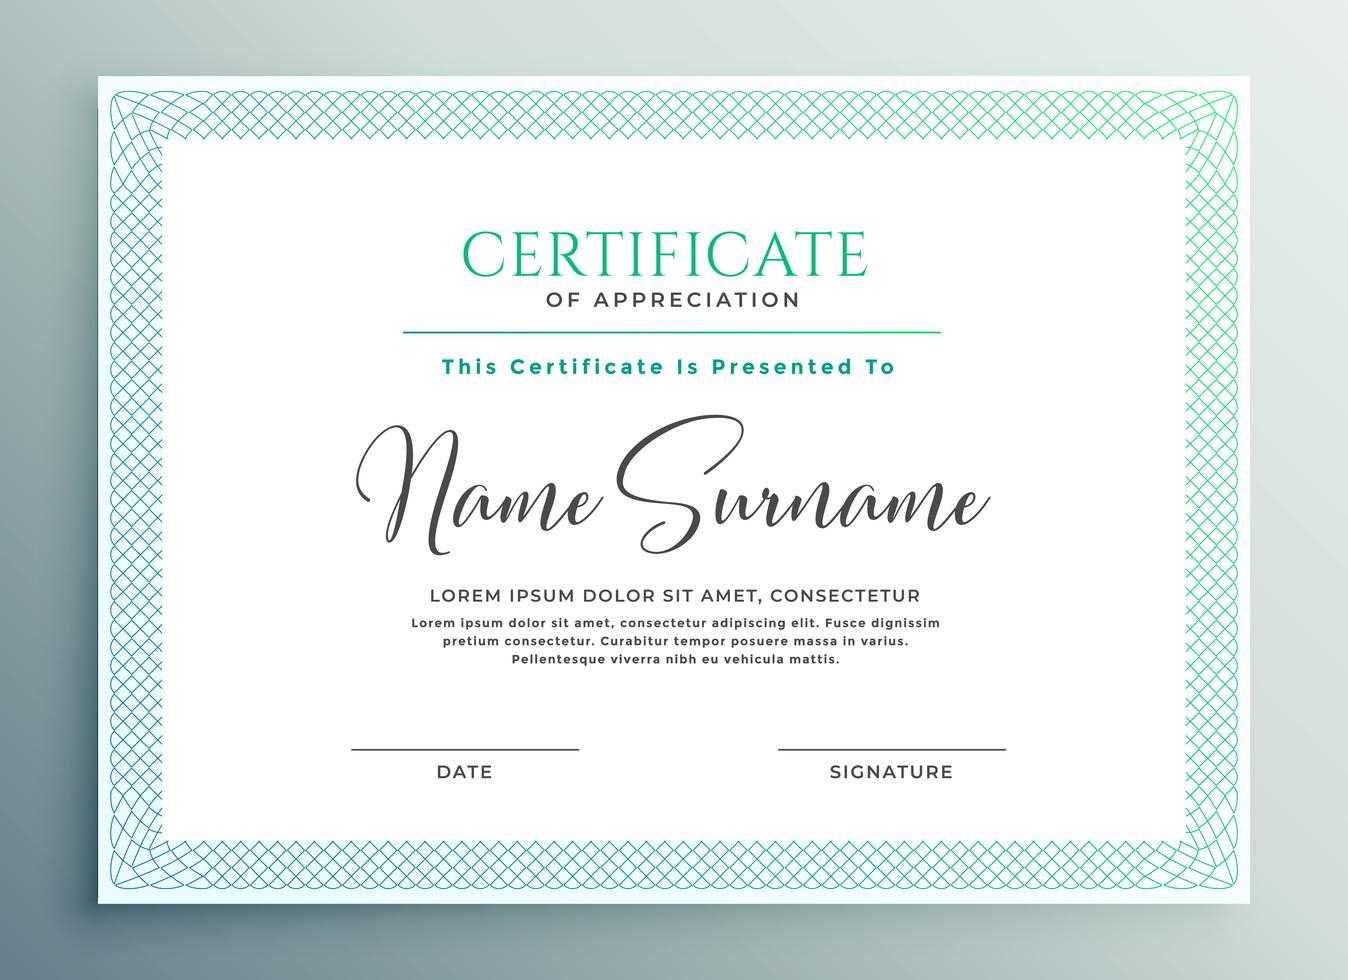 30+ Certificate Of Appreciation Download!! | Templates Study With Regard To Certificate Of Excellence Template Word